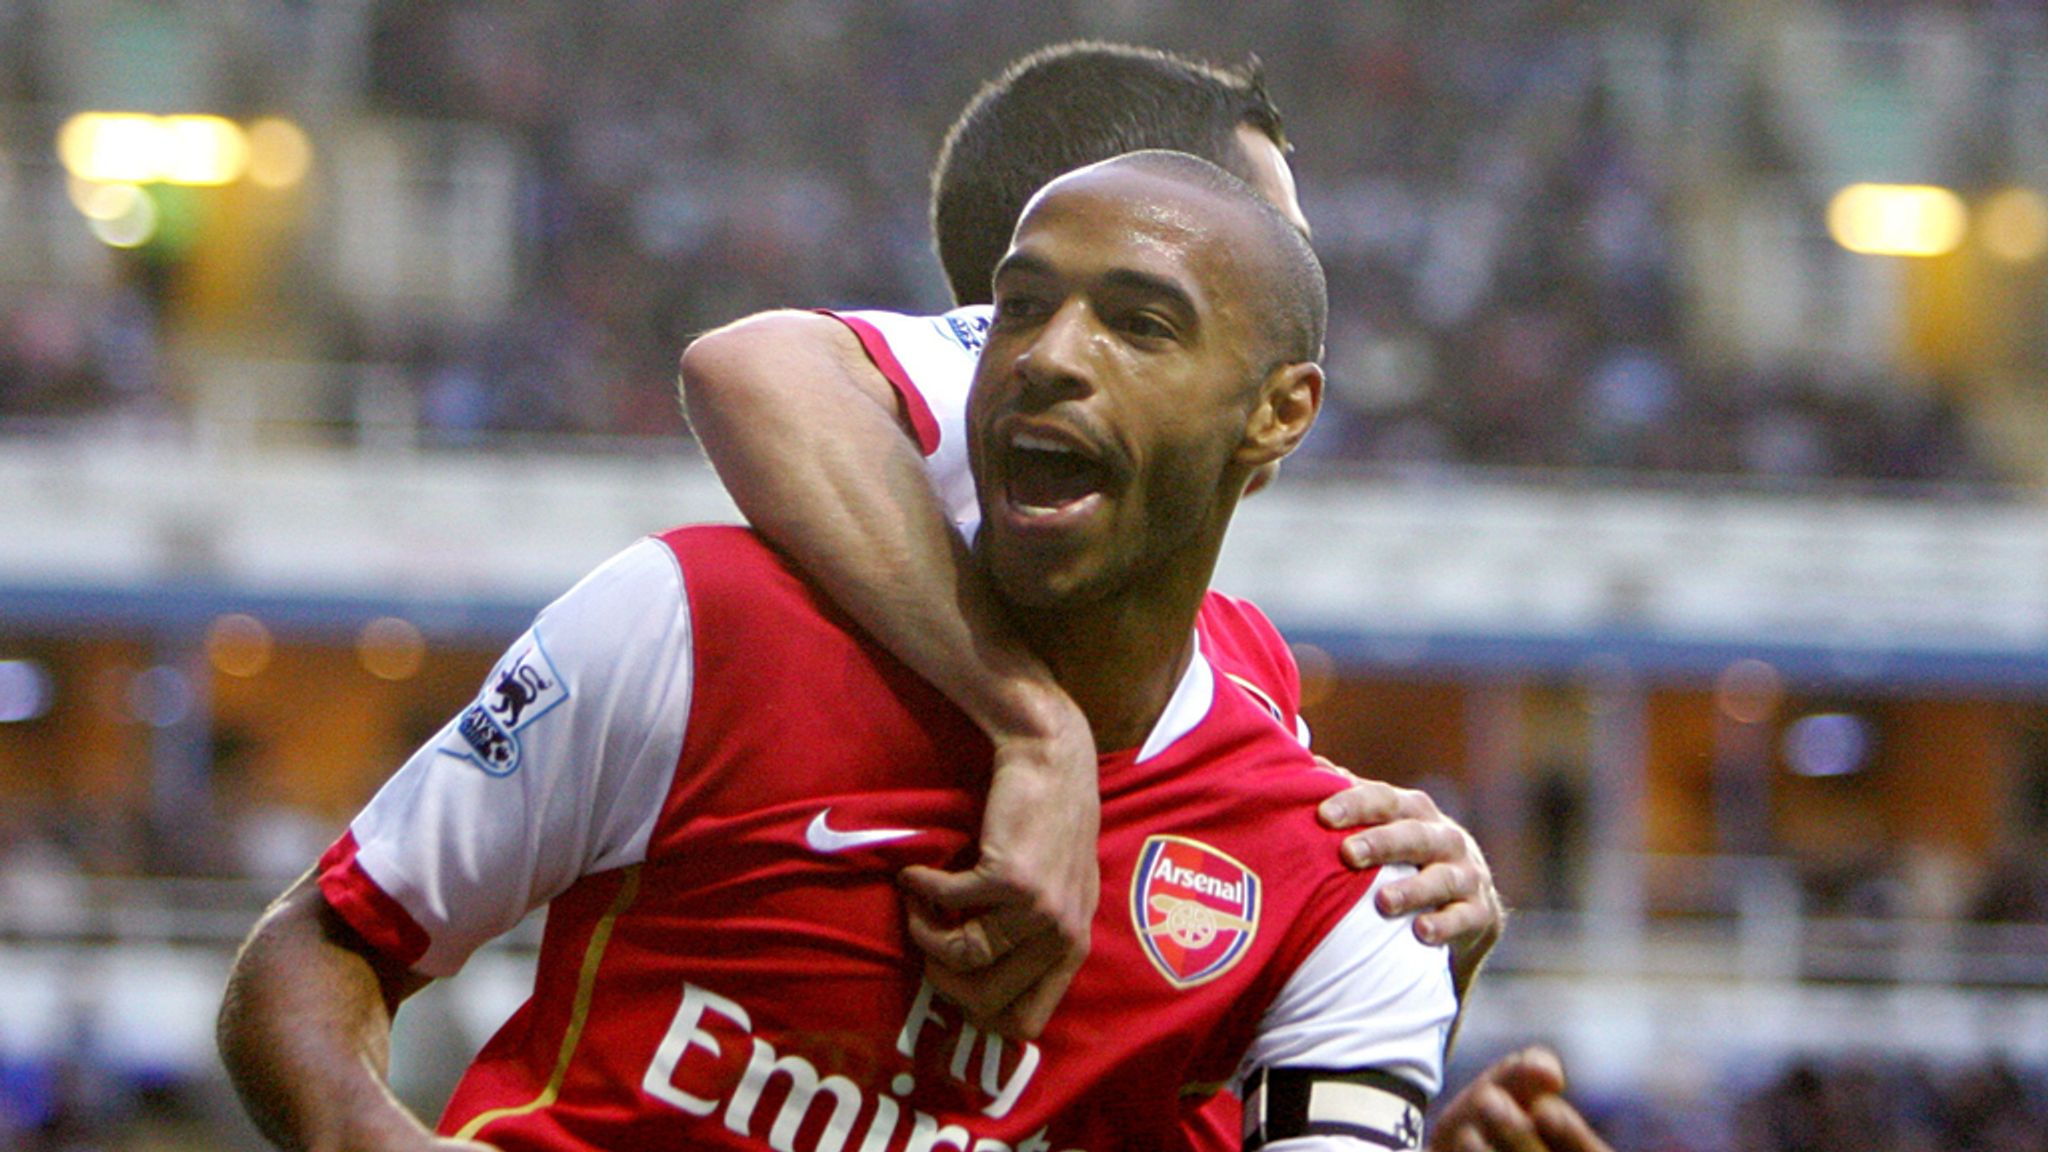 He's back! French footballing legend Thierry Henry has returned to